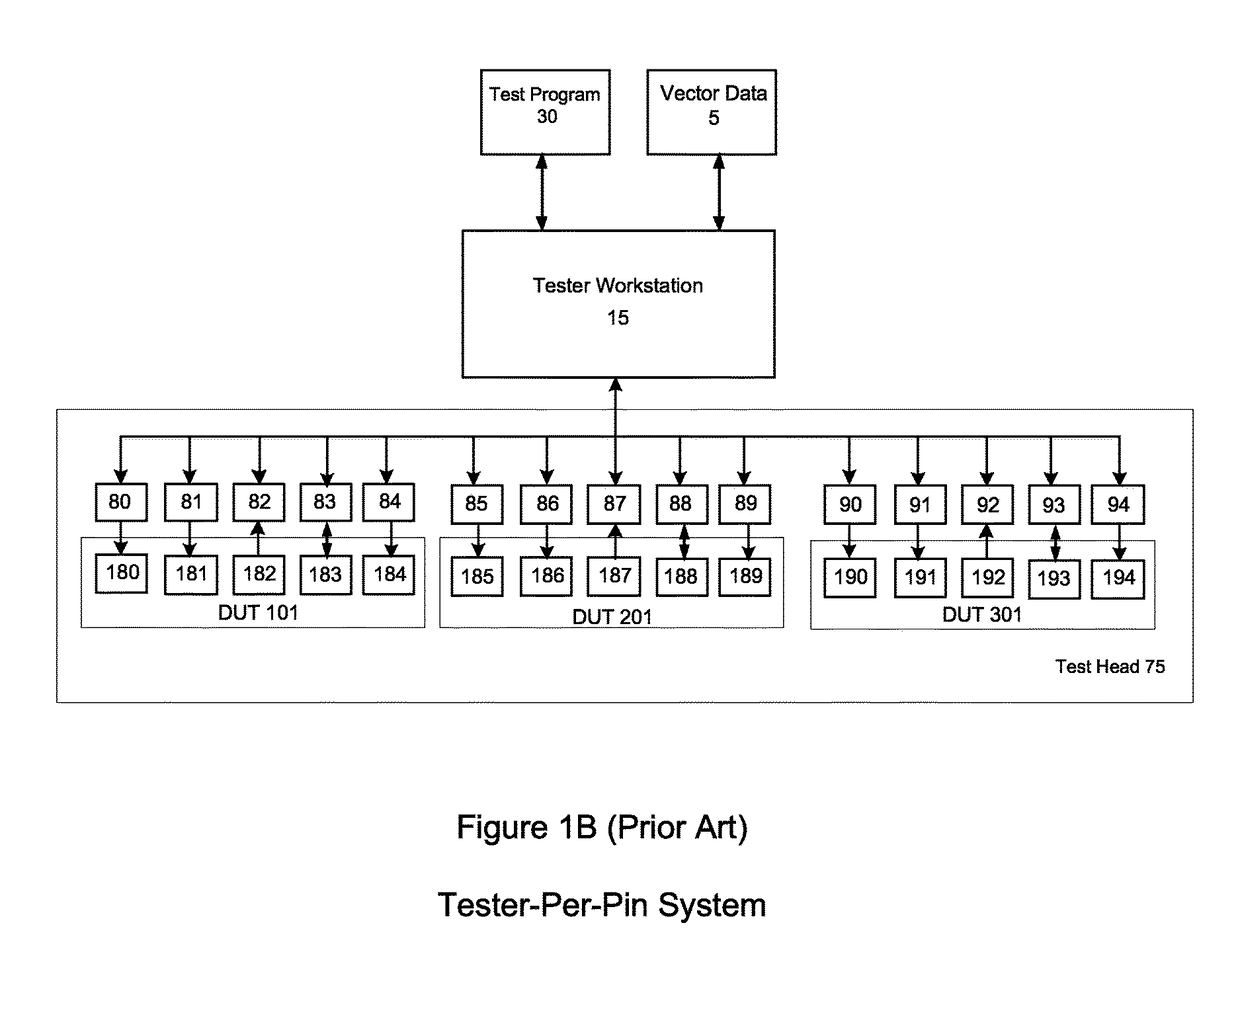 Pseudo tester-per-site functionality on natively tester-per-pin automatic test equipment for semiconductor test